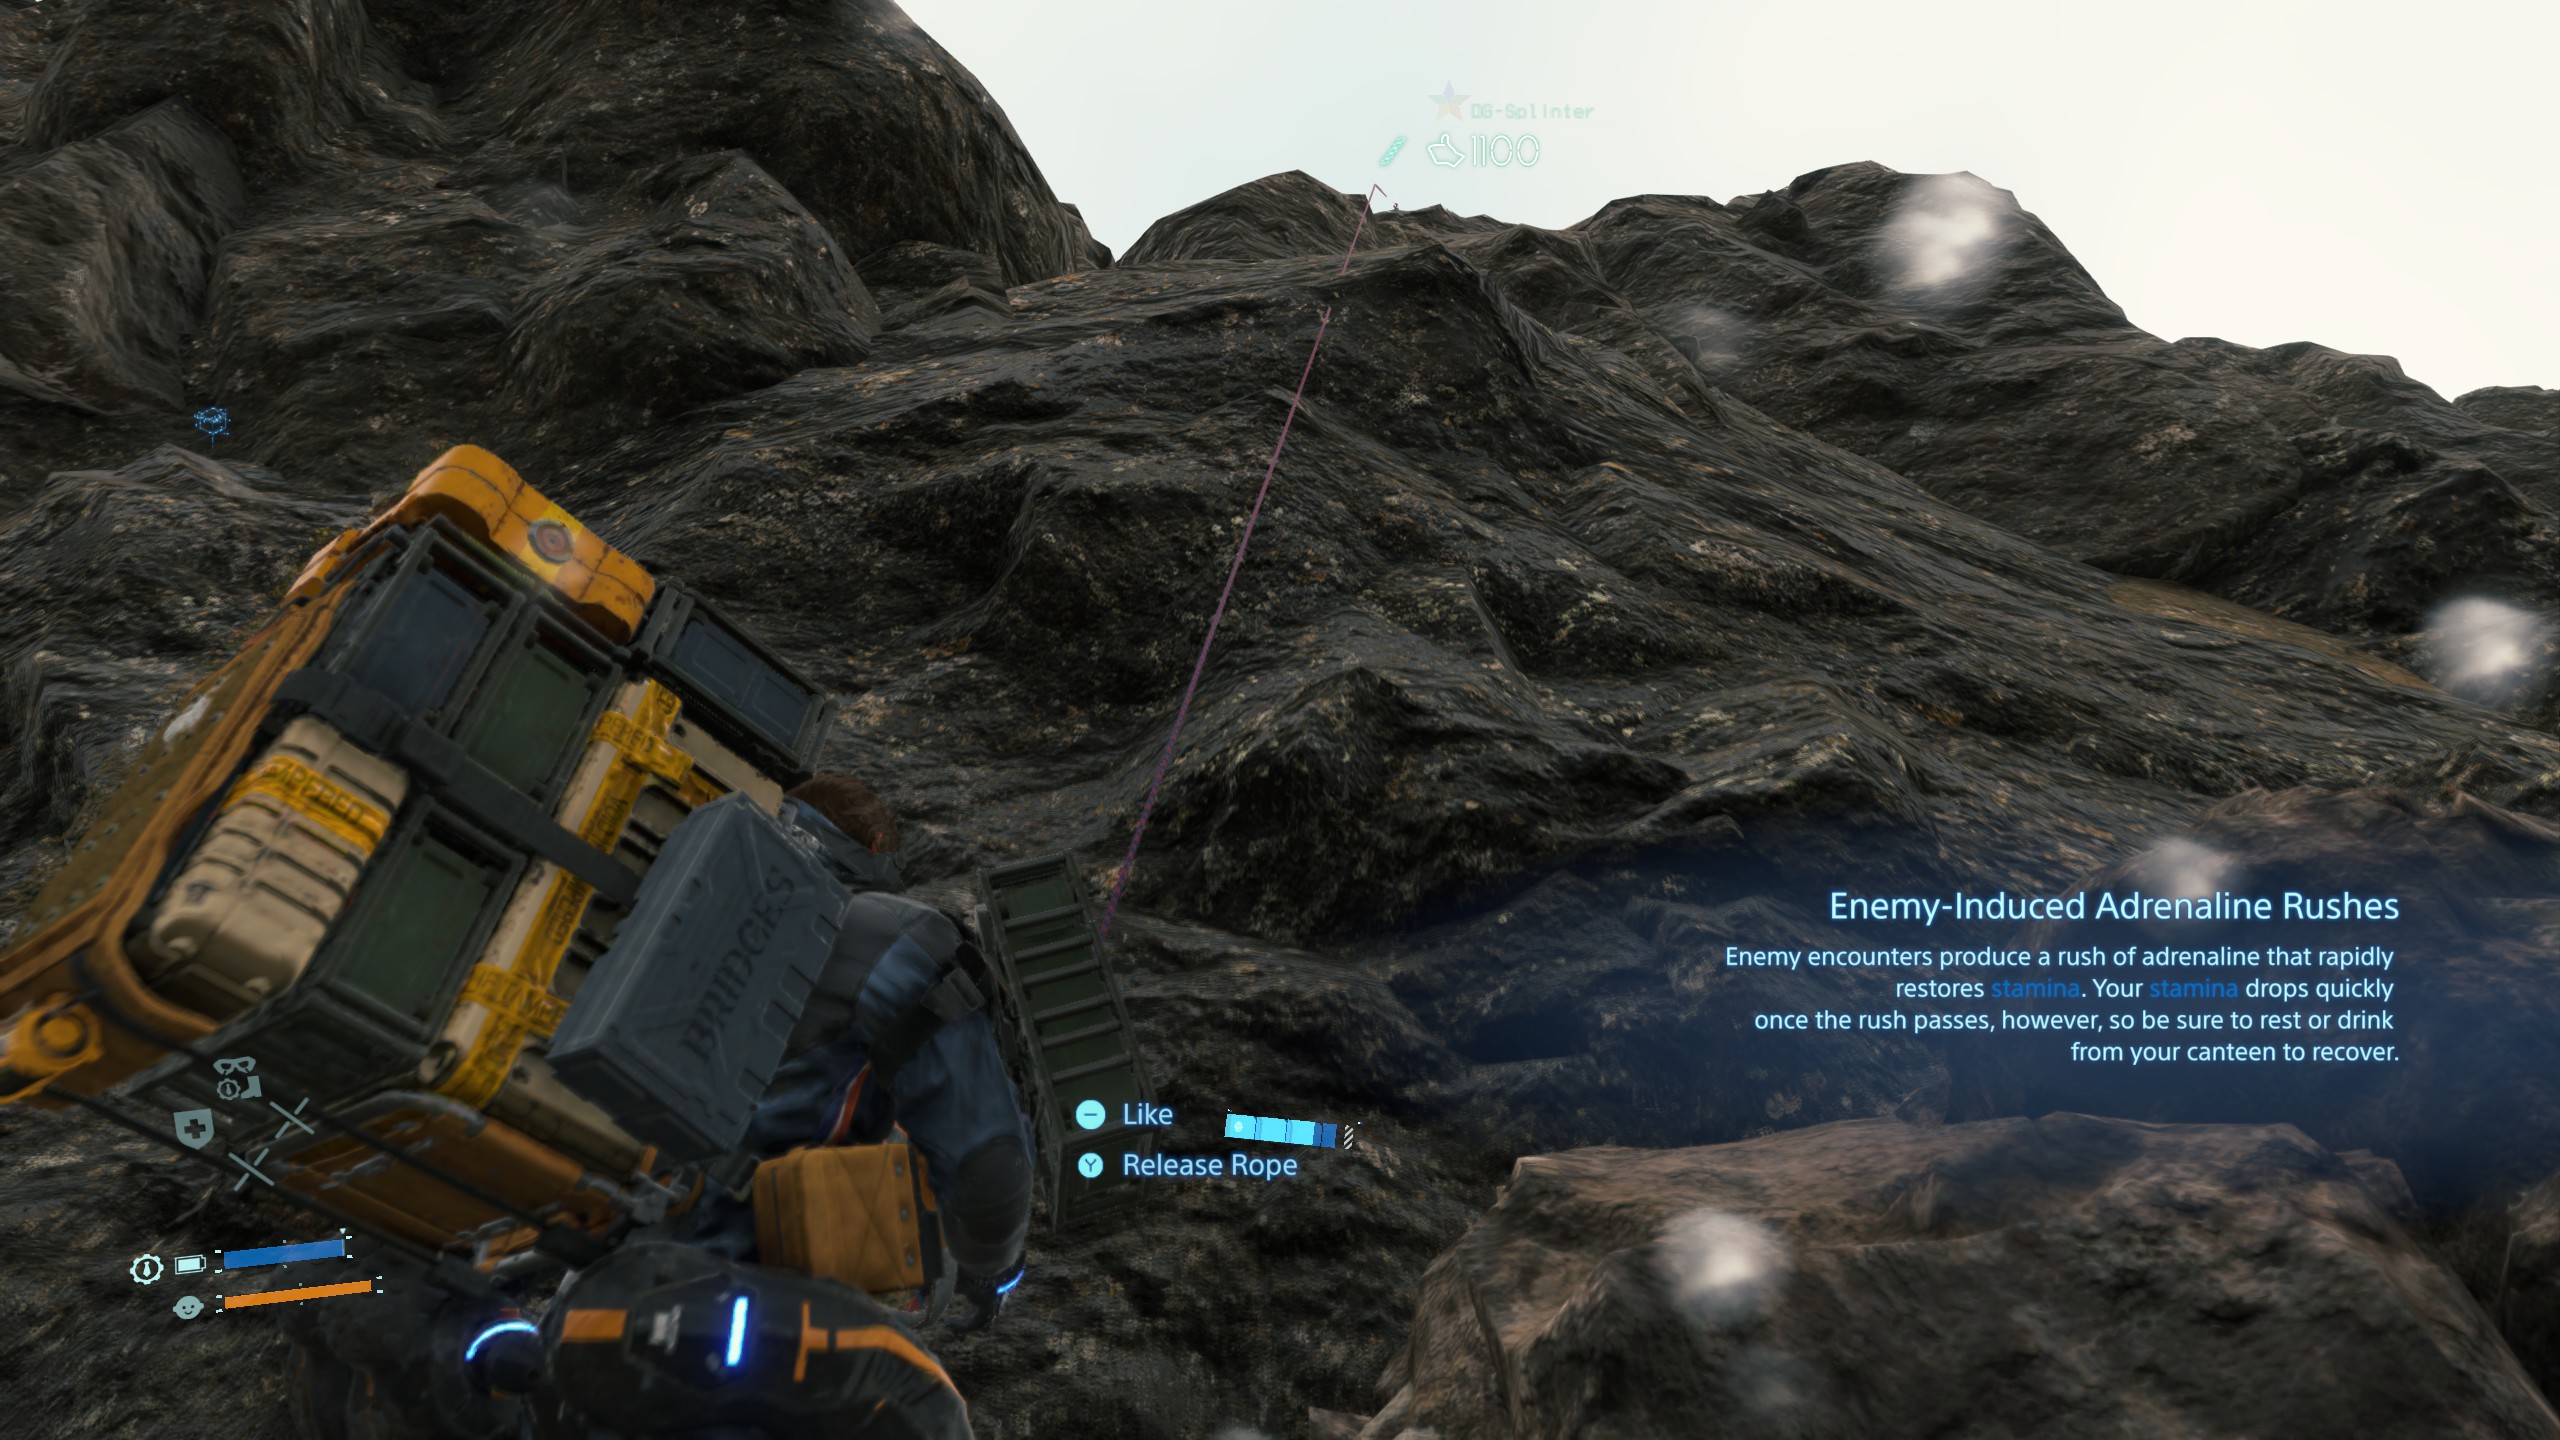 A picture of Death Stranding gameplay, showing the protagonist Sam Porter Bridges attempting to climb a sheer cliff face using a rope that another player left behind